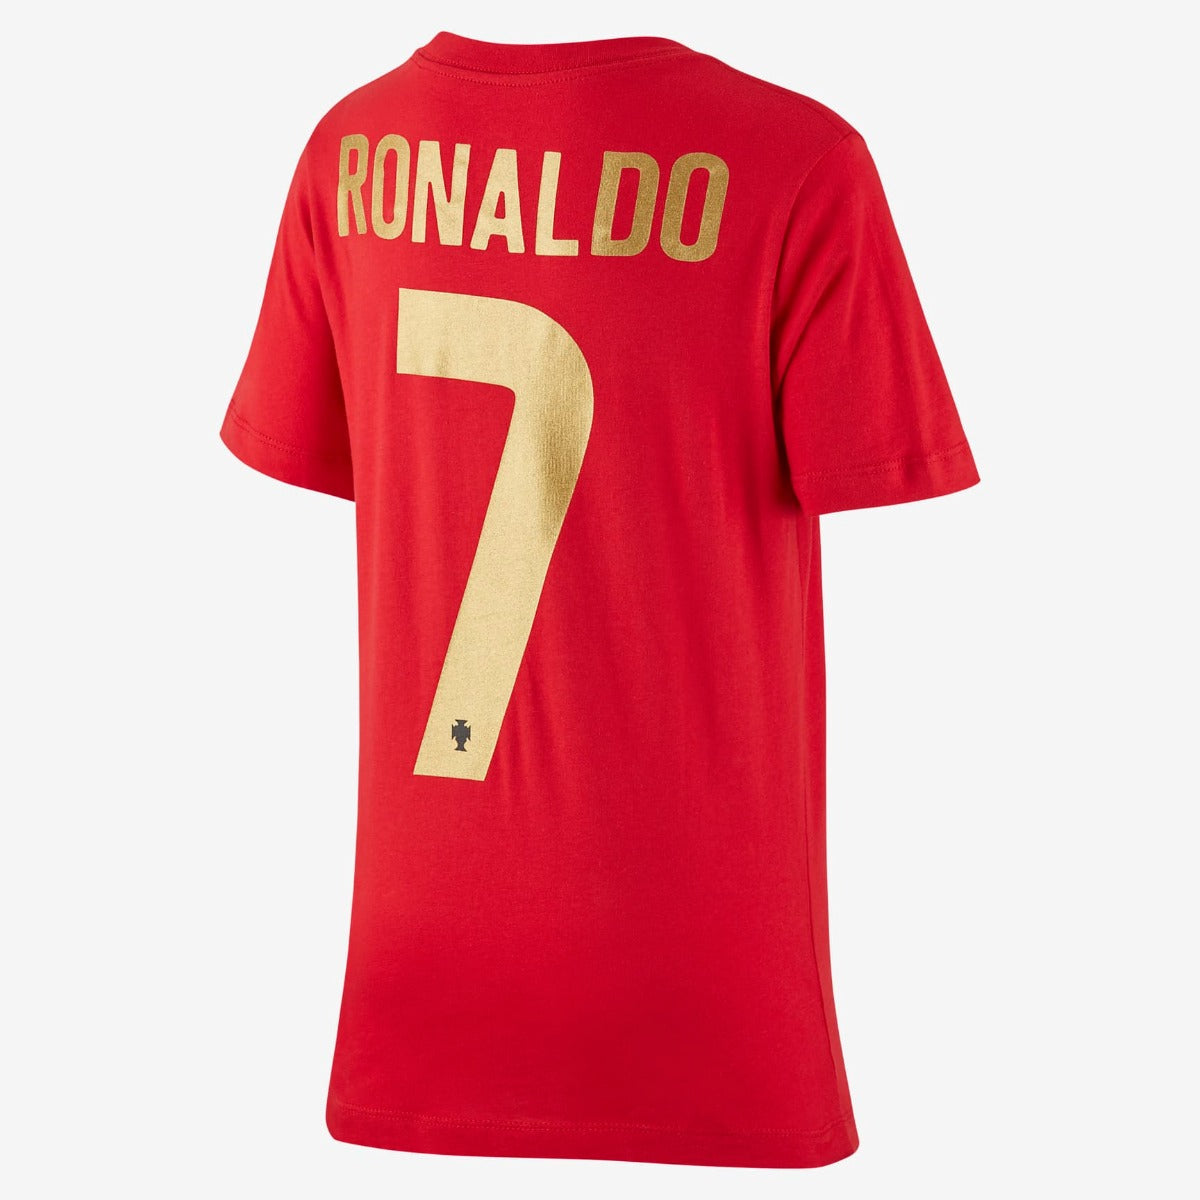 Nike 2020-21 Portugal Youth CR7 Name and Number Tee - Red